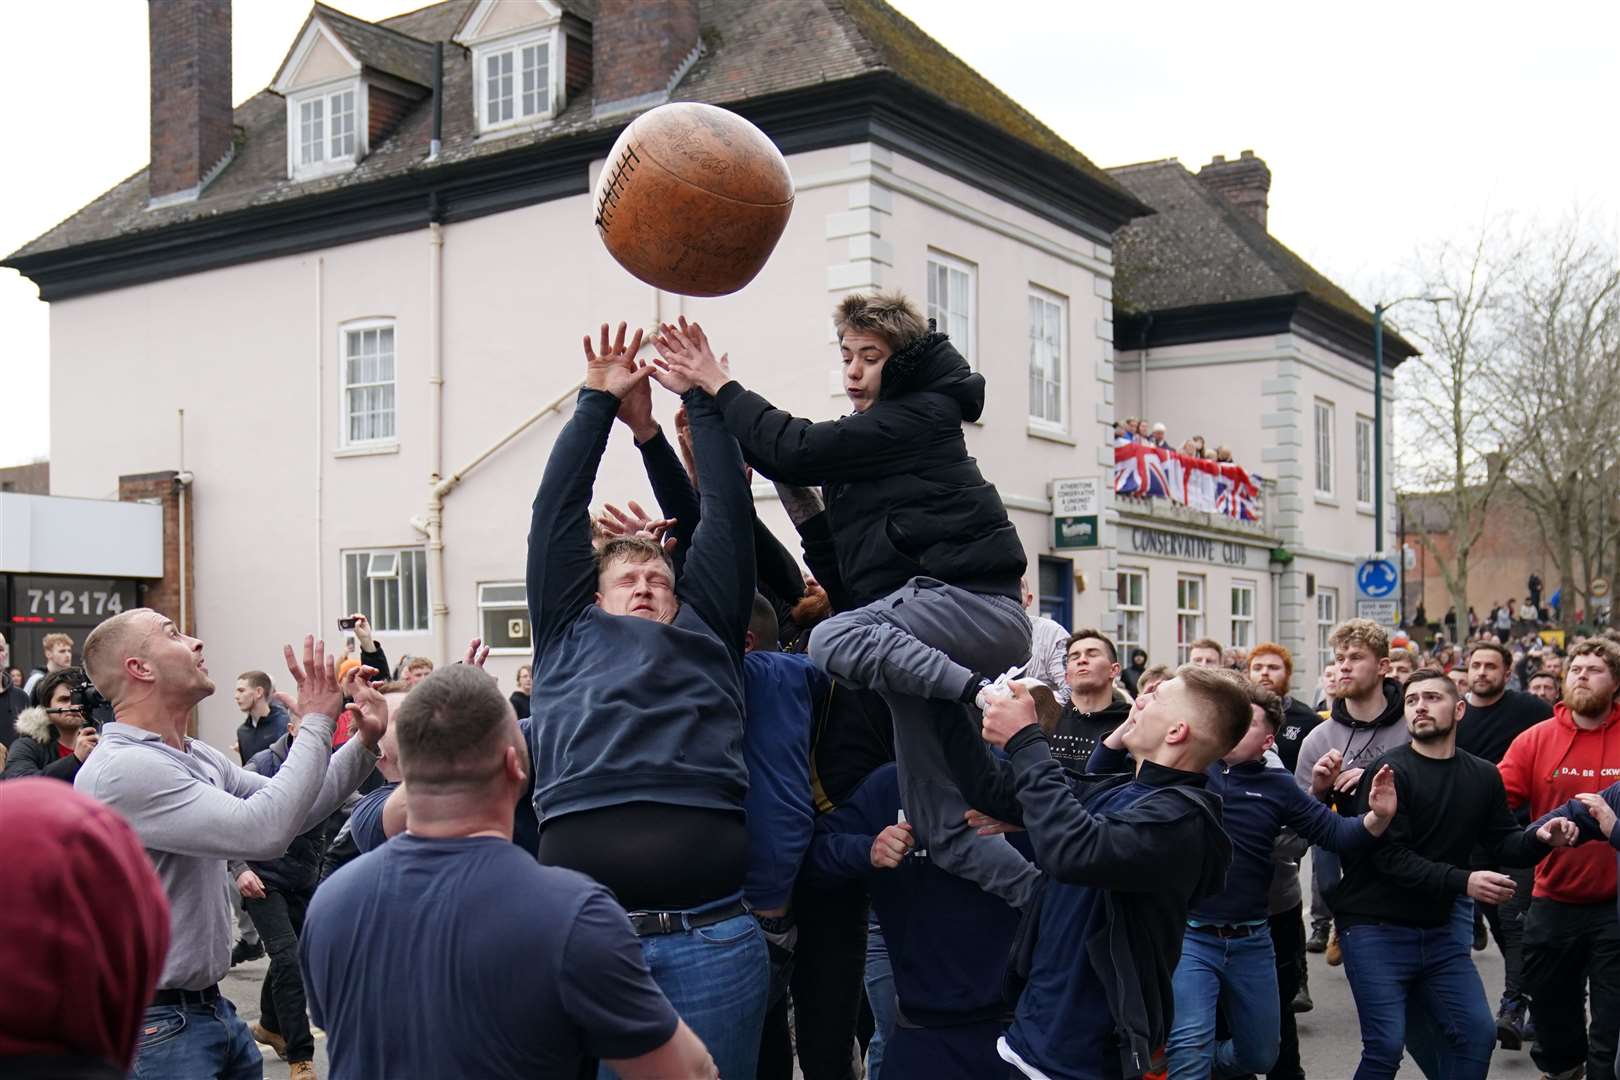 Players battle for possession during the Atherstone Ball Game in Warwickshire, which honours a match played between Leicestershire and Warwickshire in 1199, when teams used a bag of gold as a ball (Joe Giddens/PA)